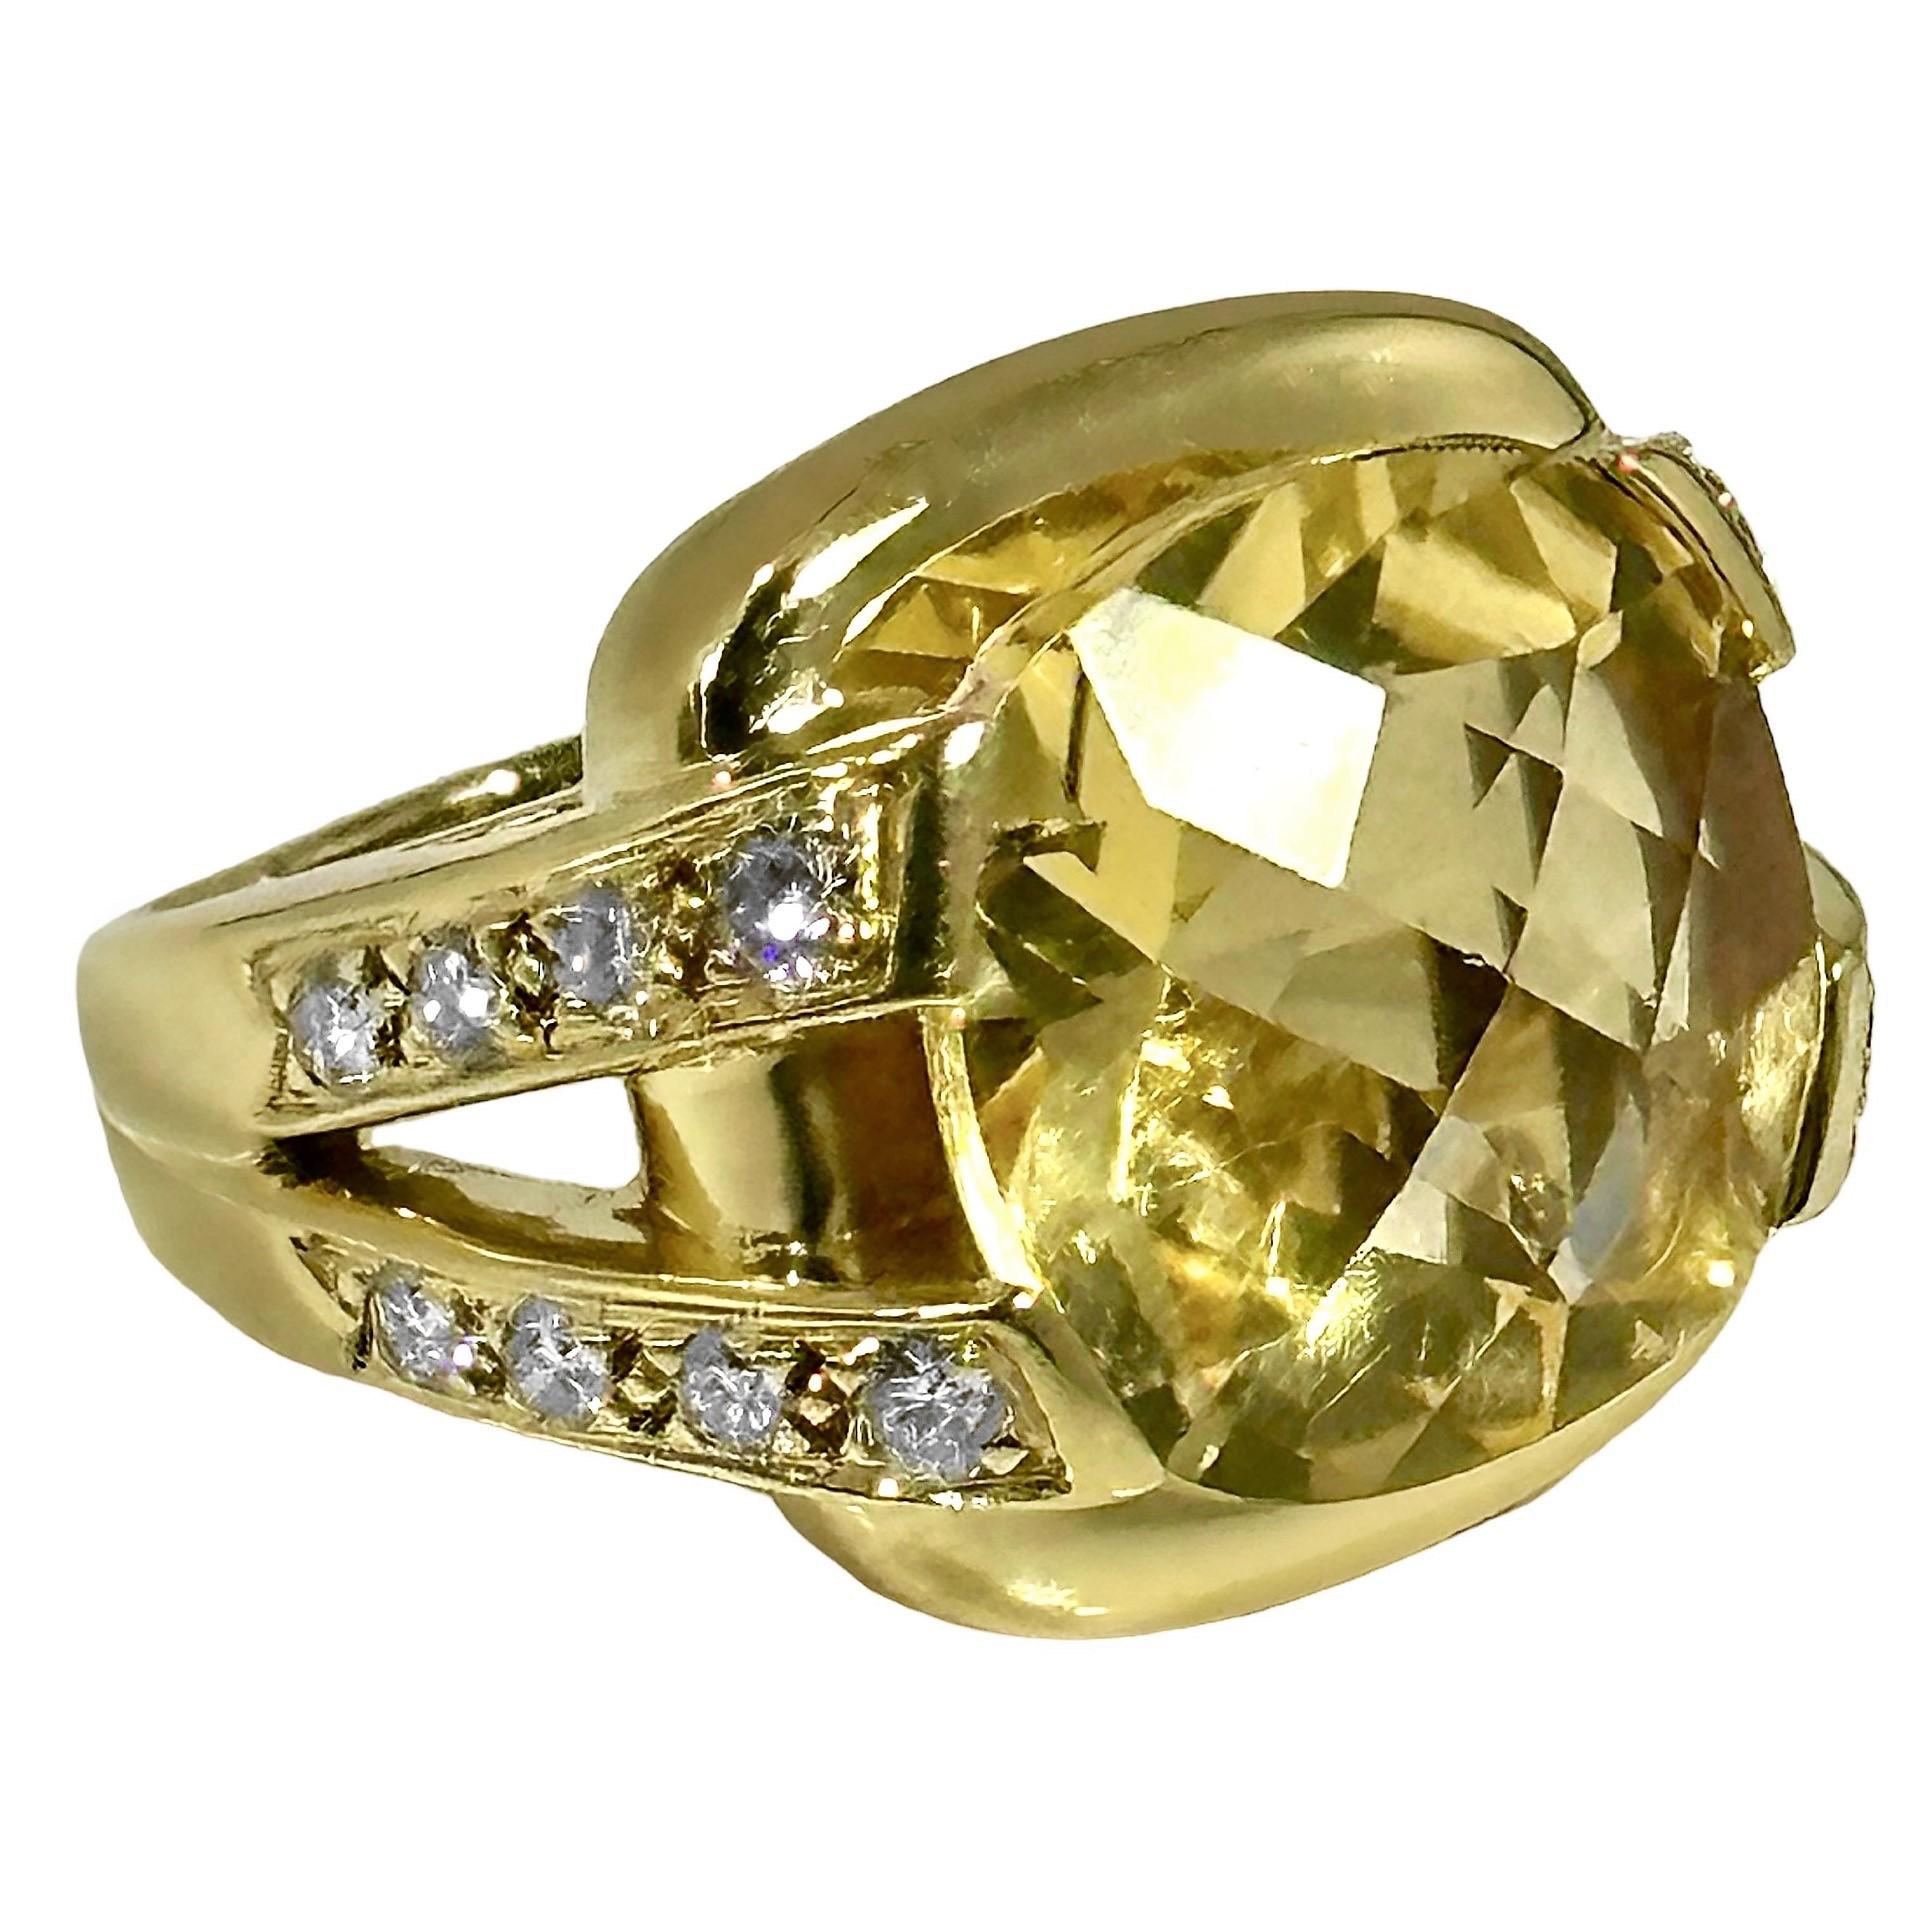 This intriguing Late-20th Century 18k yellow gold fashion ring features a cushion shaped and checkerboard cut golden citrine flanked by two 